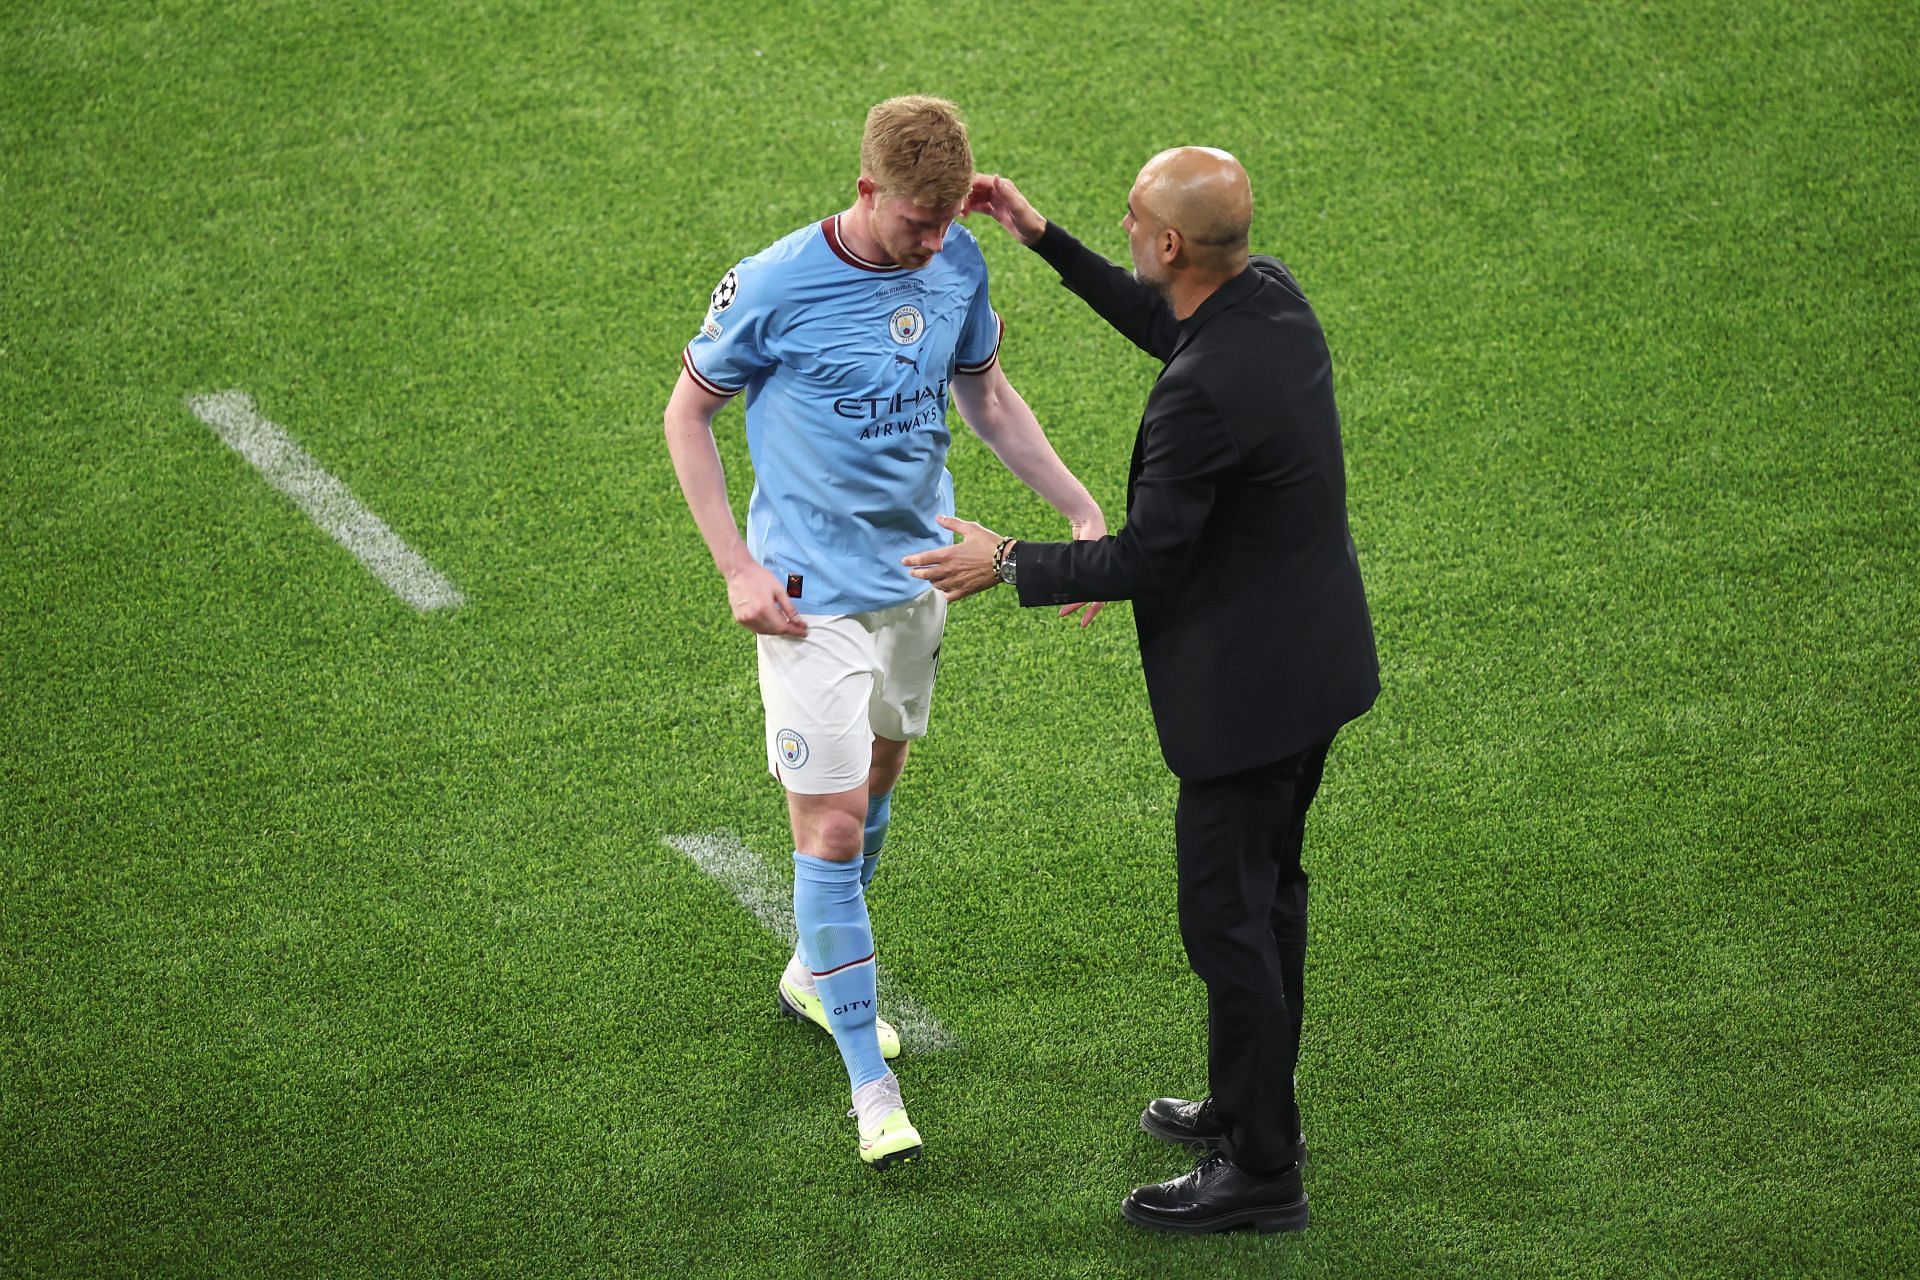 De Bruyne picked up a knock in the first half.